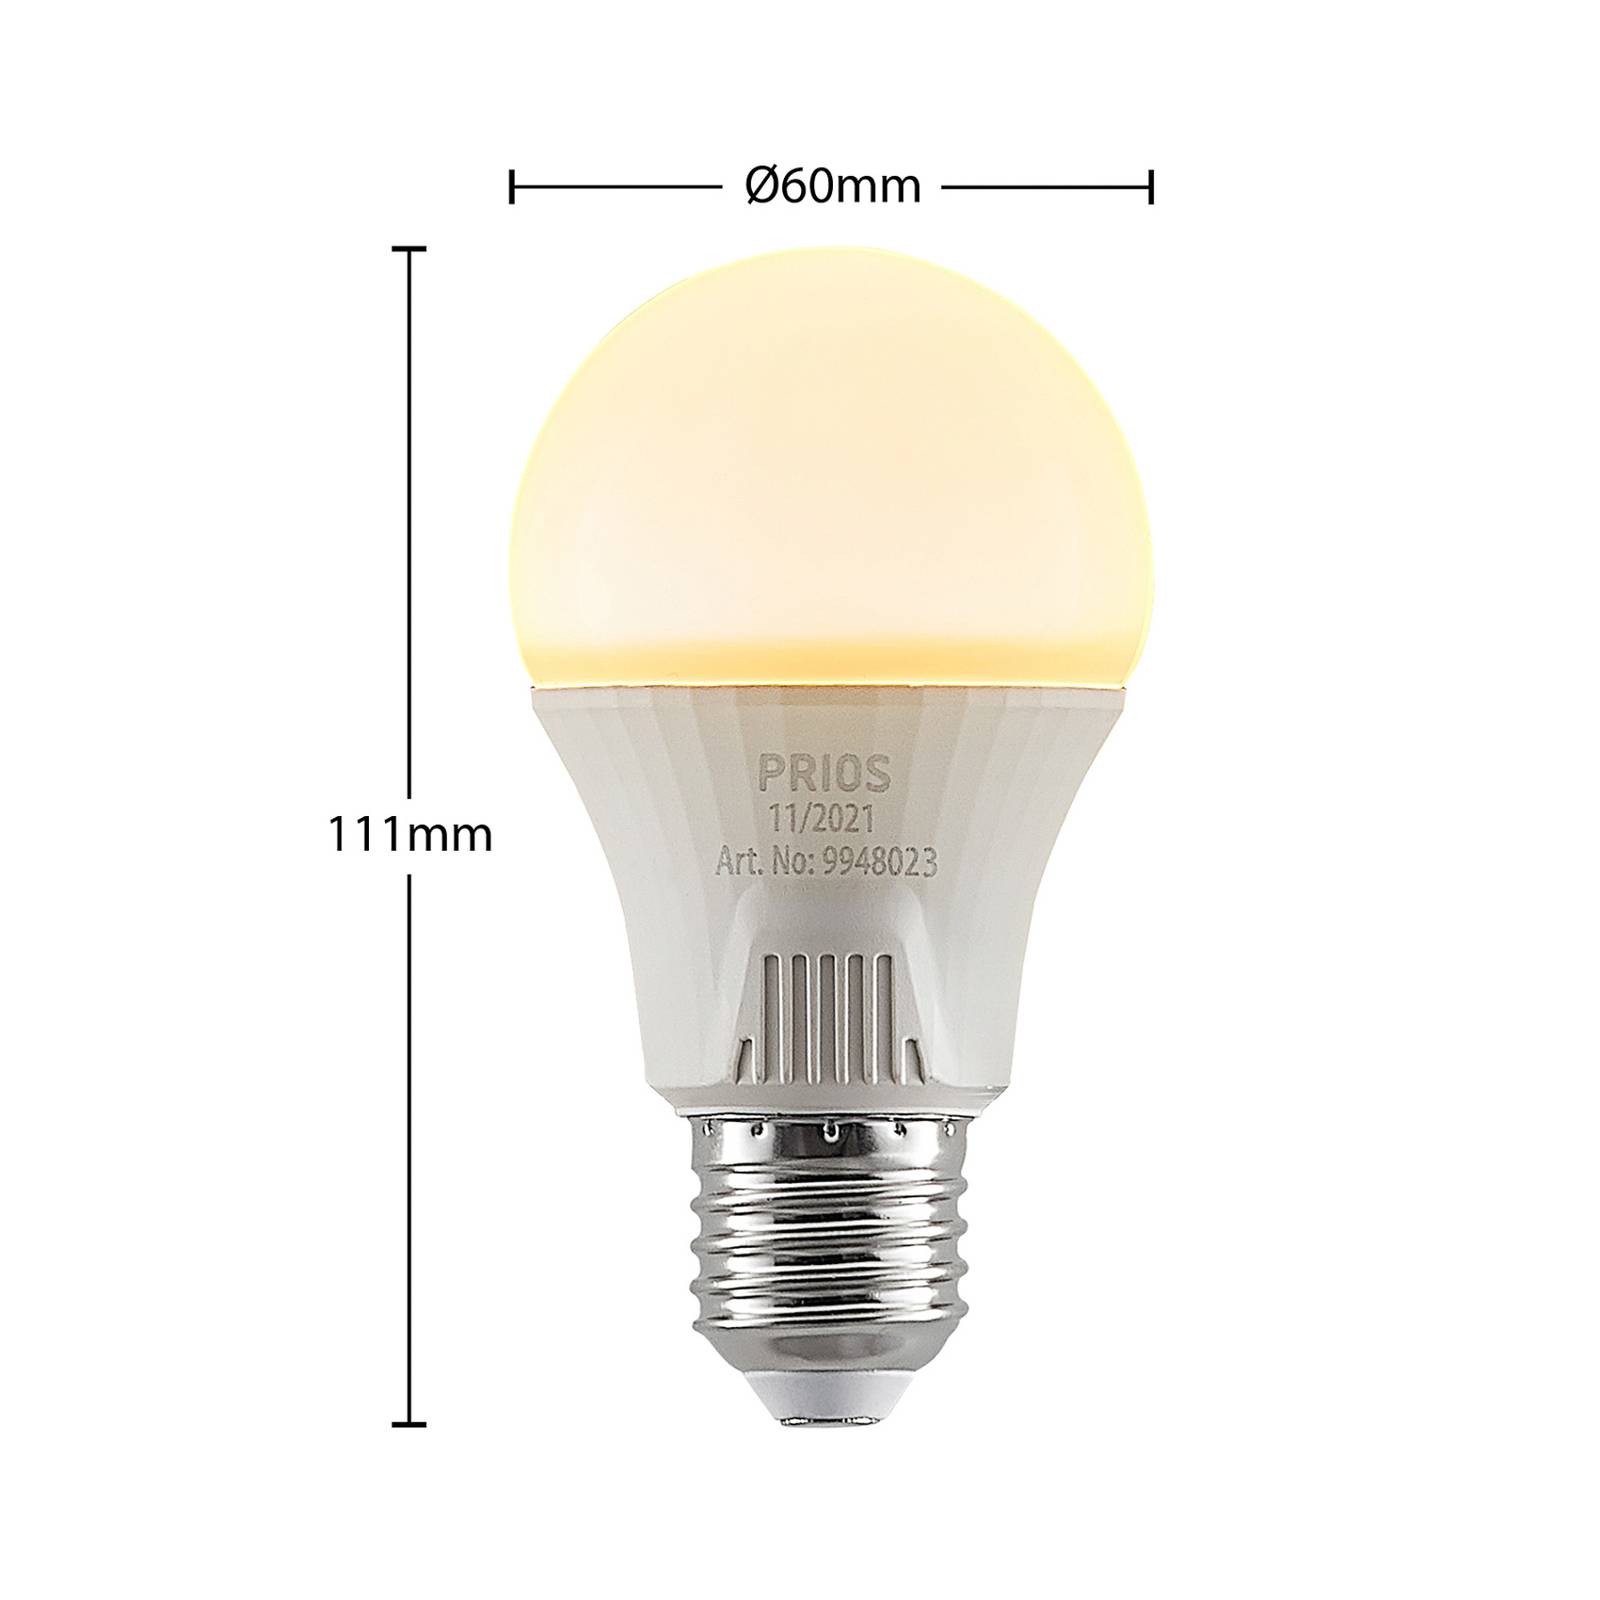 Image of PRIOS Ampoule LED E27 A60 11 W blanche 2 700 K 4251911730753